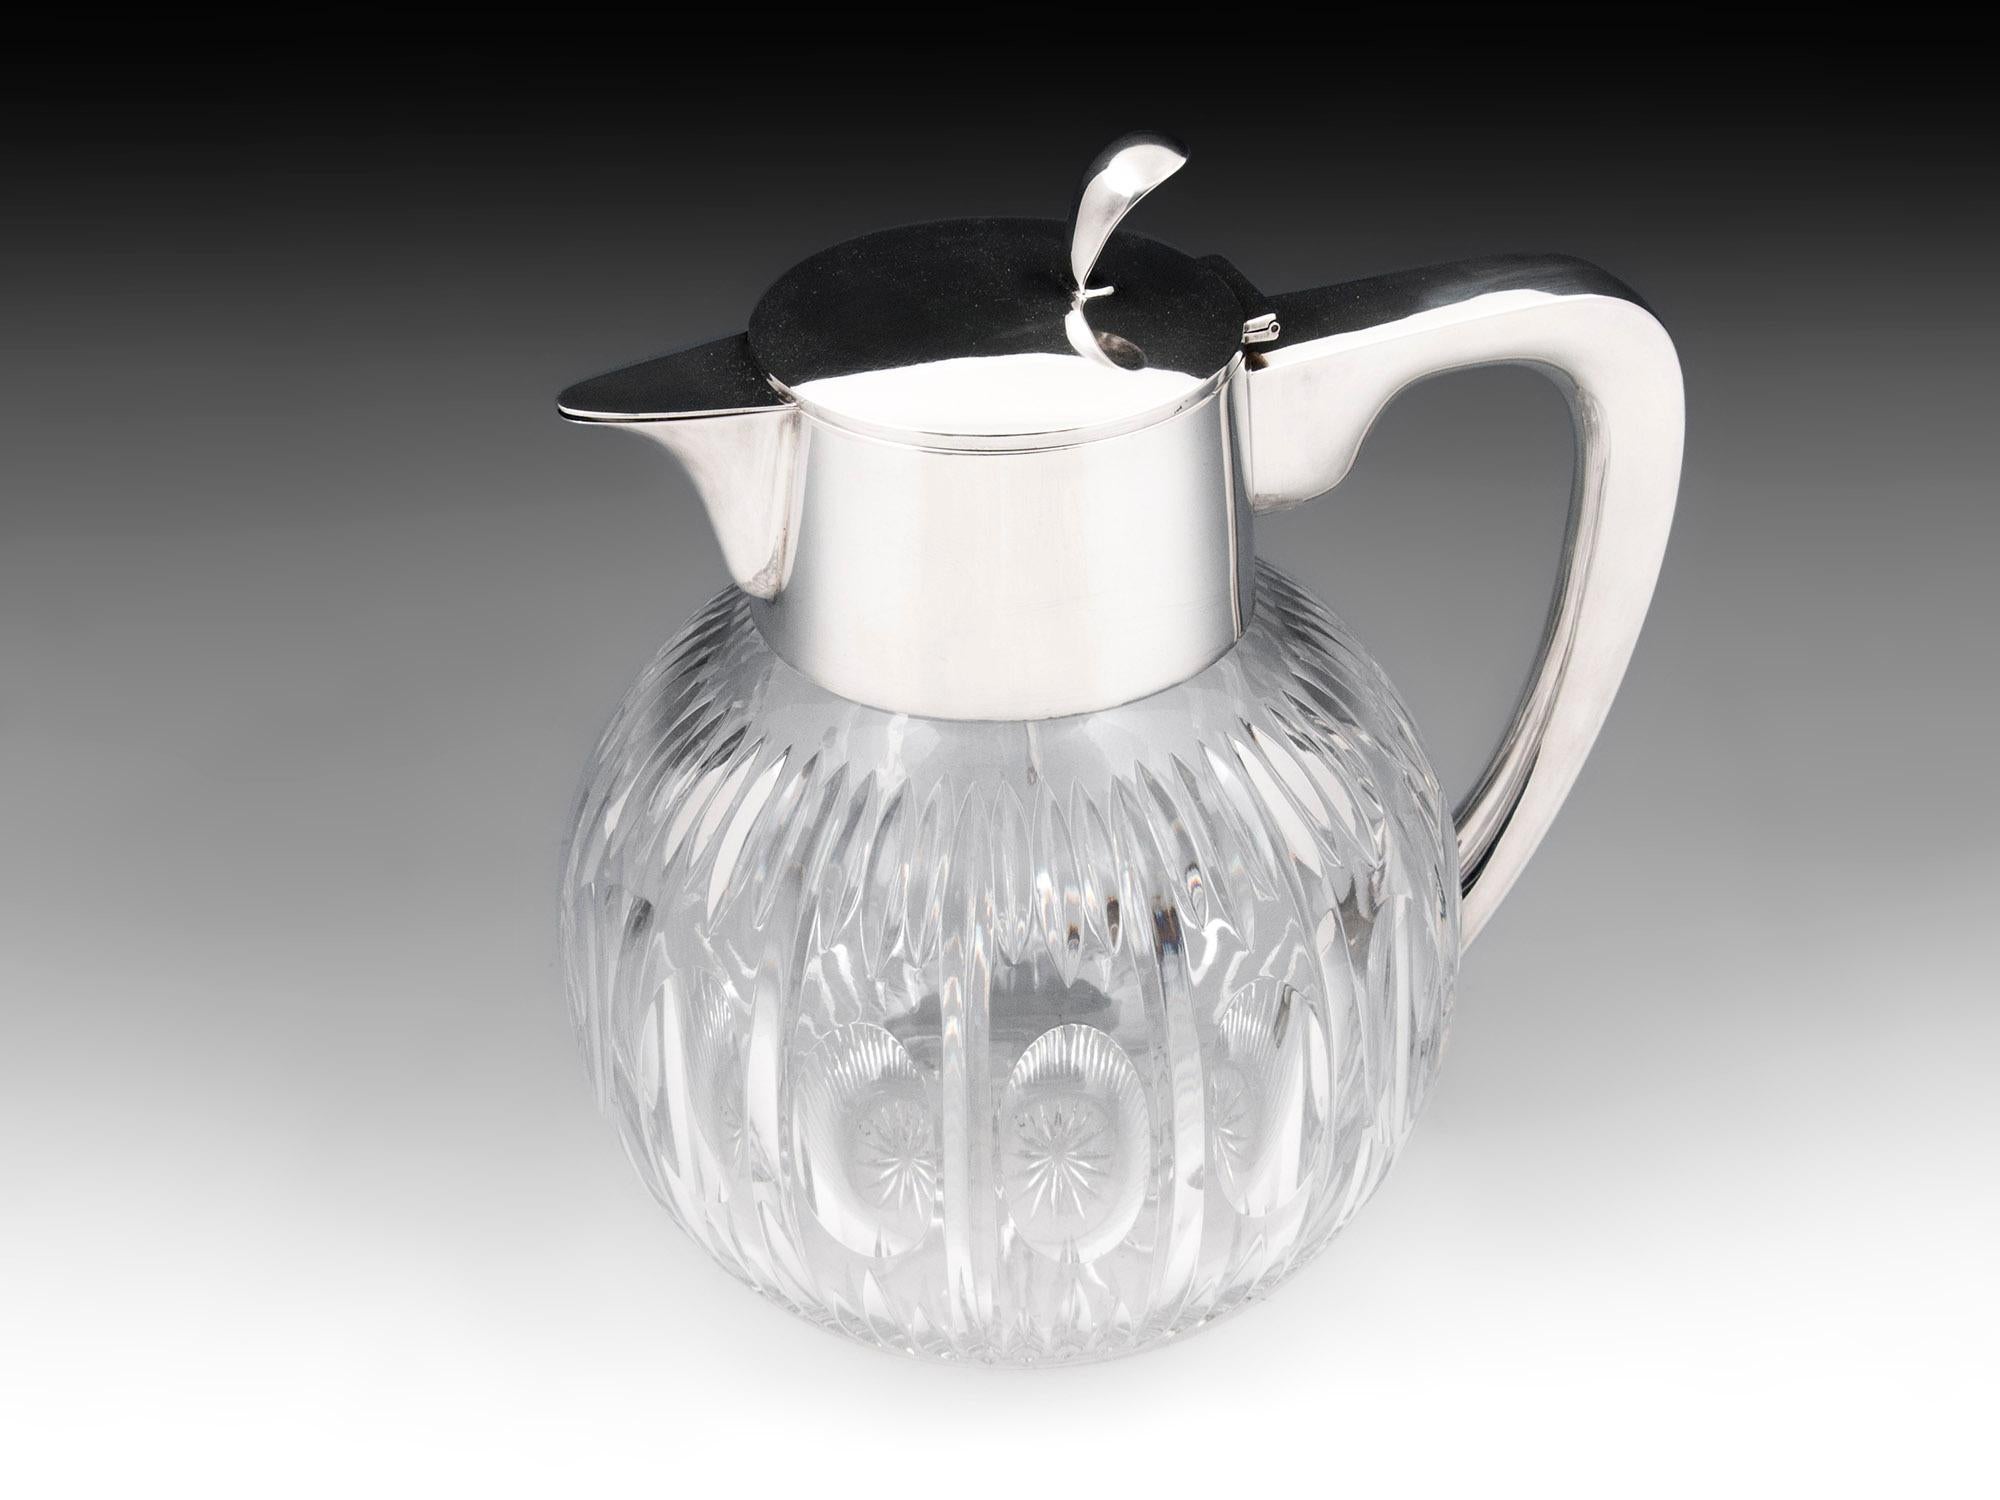 Mid-Century Modern Circa 1960

From our Decanter collection, we are pleased to offer this German Silver Mounted Glass Pitcher. The Glass picture of globular form with large rounded hand-cut glass body, star cut base and decorated body mounted with a